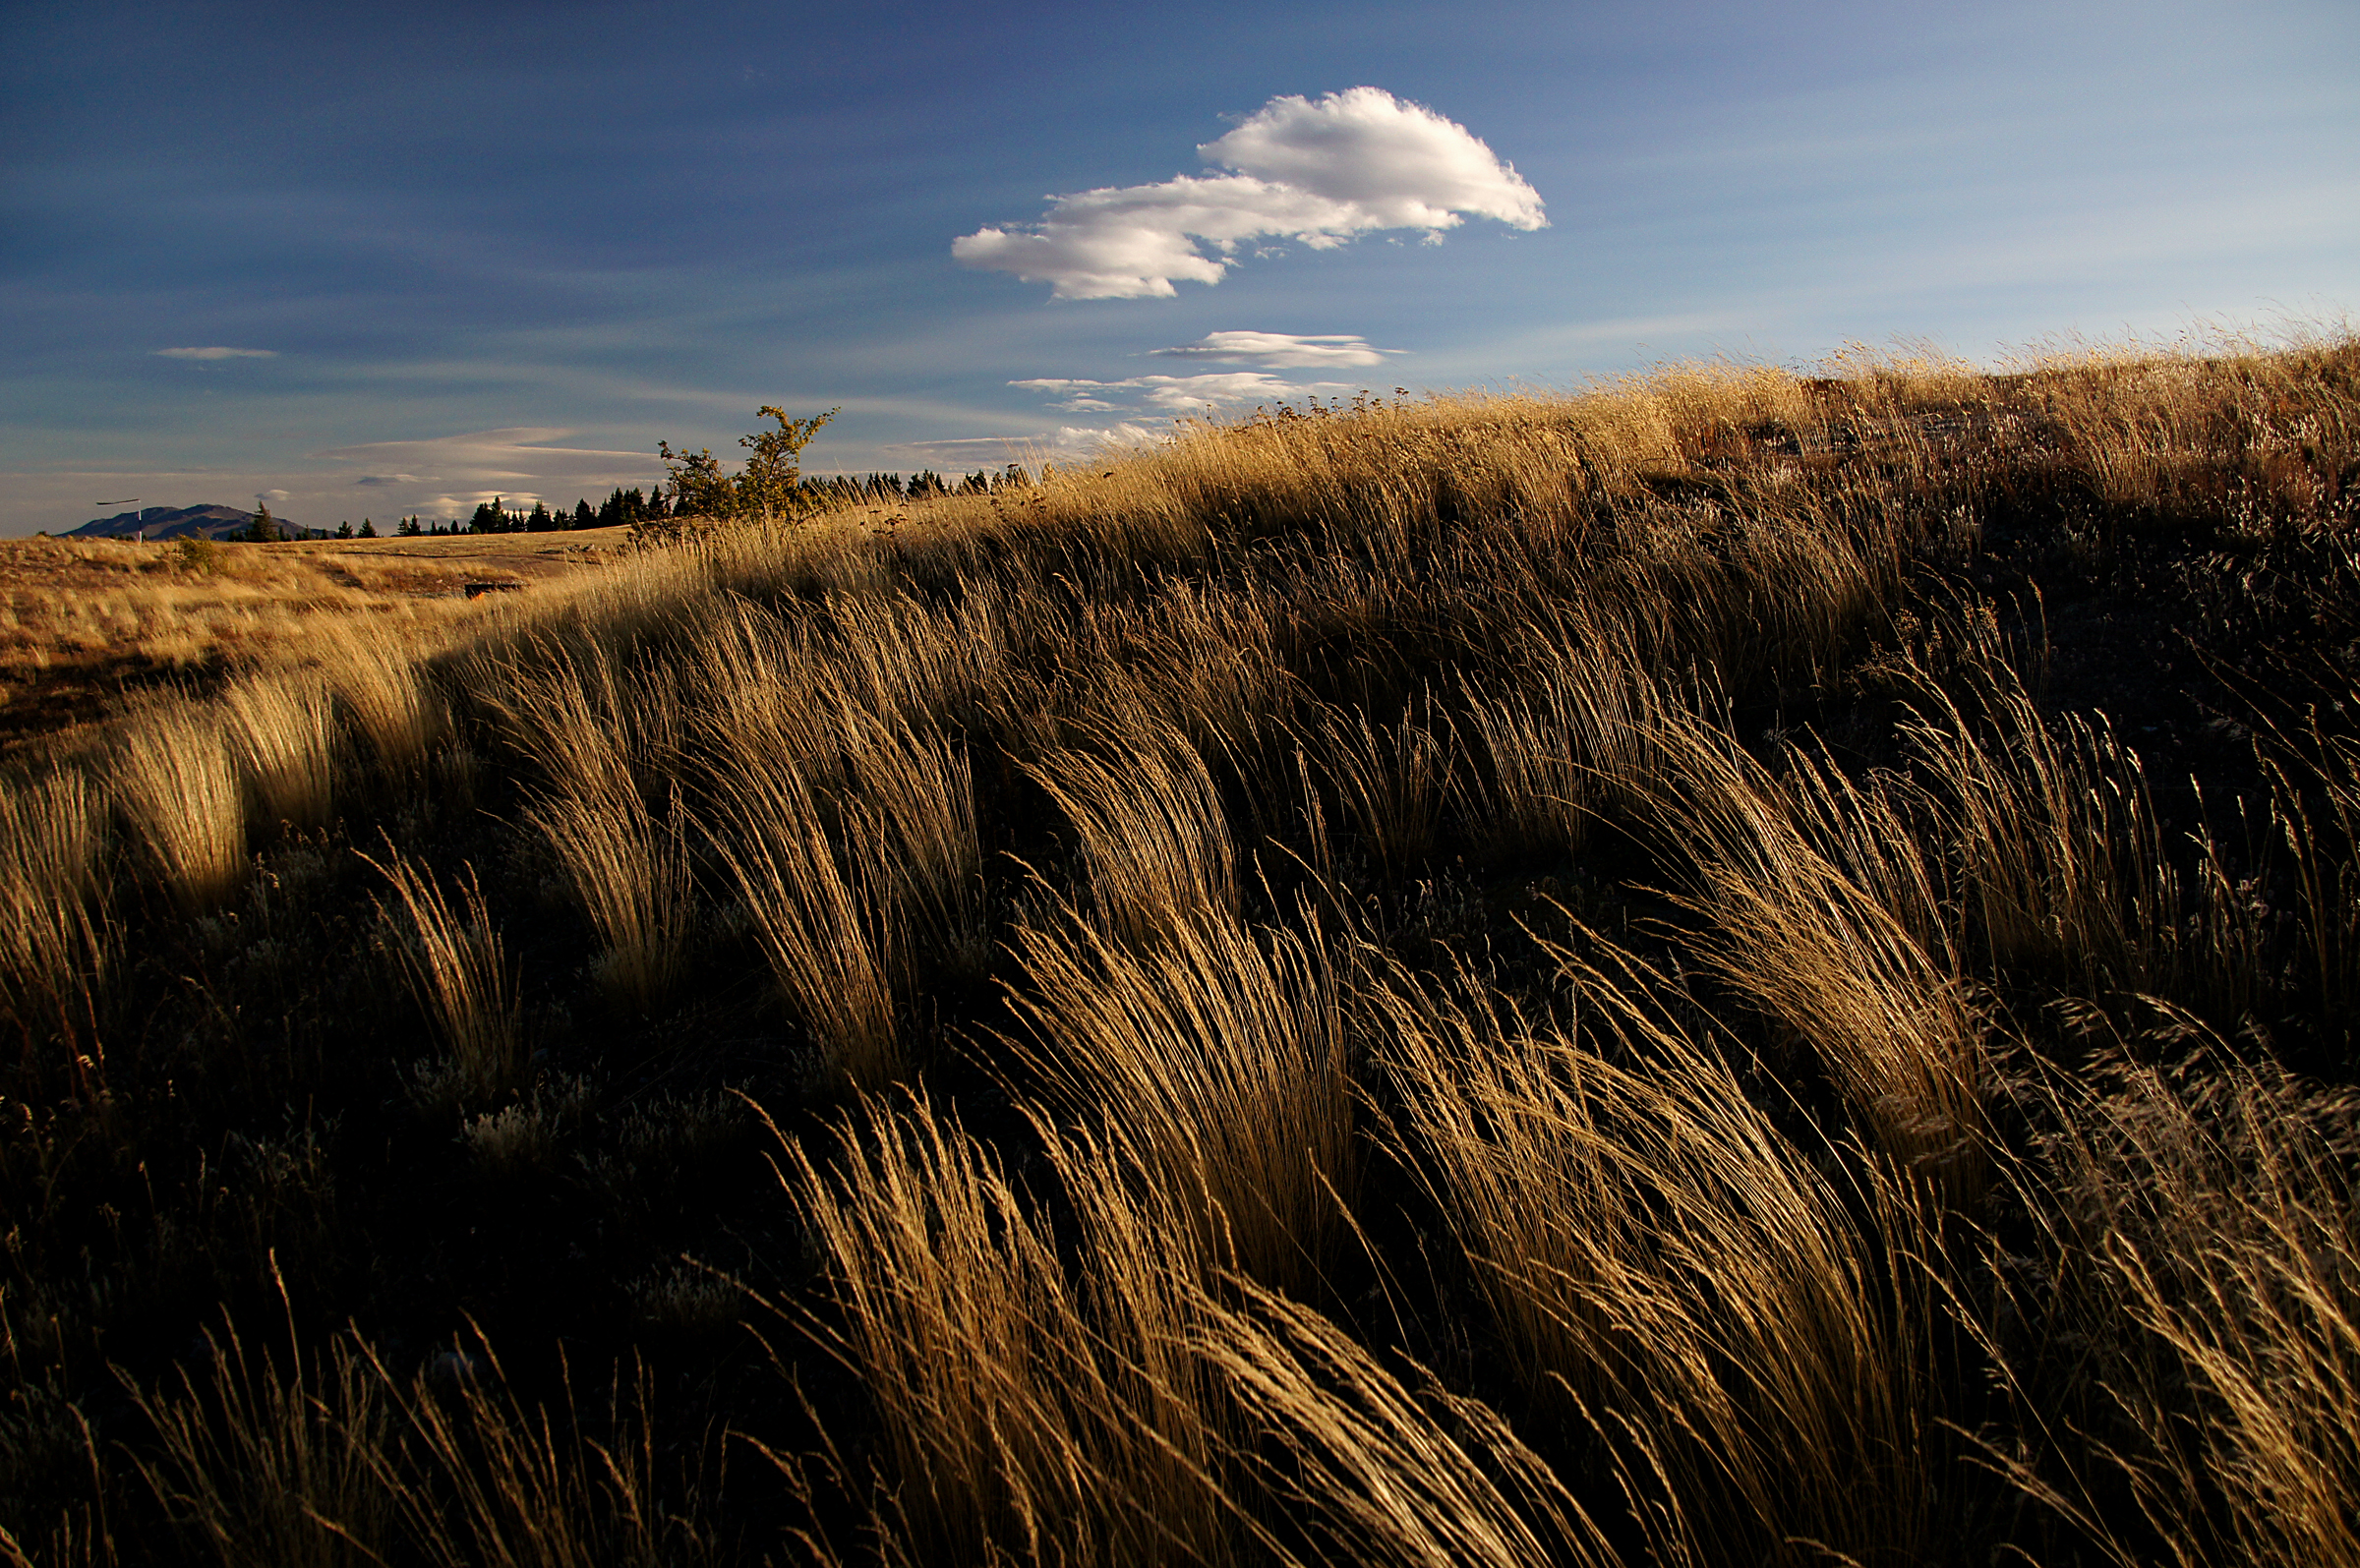 Photograph of grass tussocks on a hillside. The grasses are dry and yellowish in appearance.